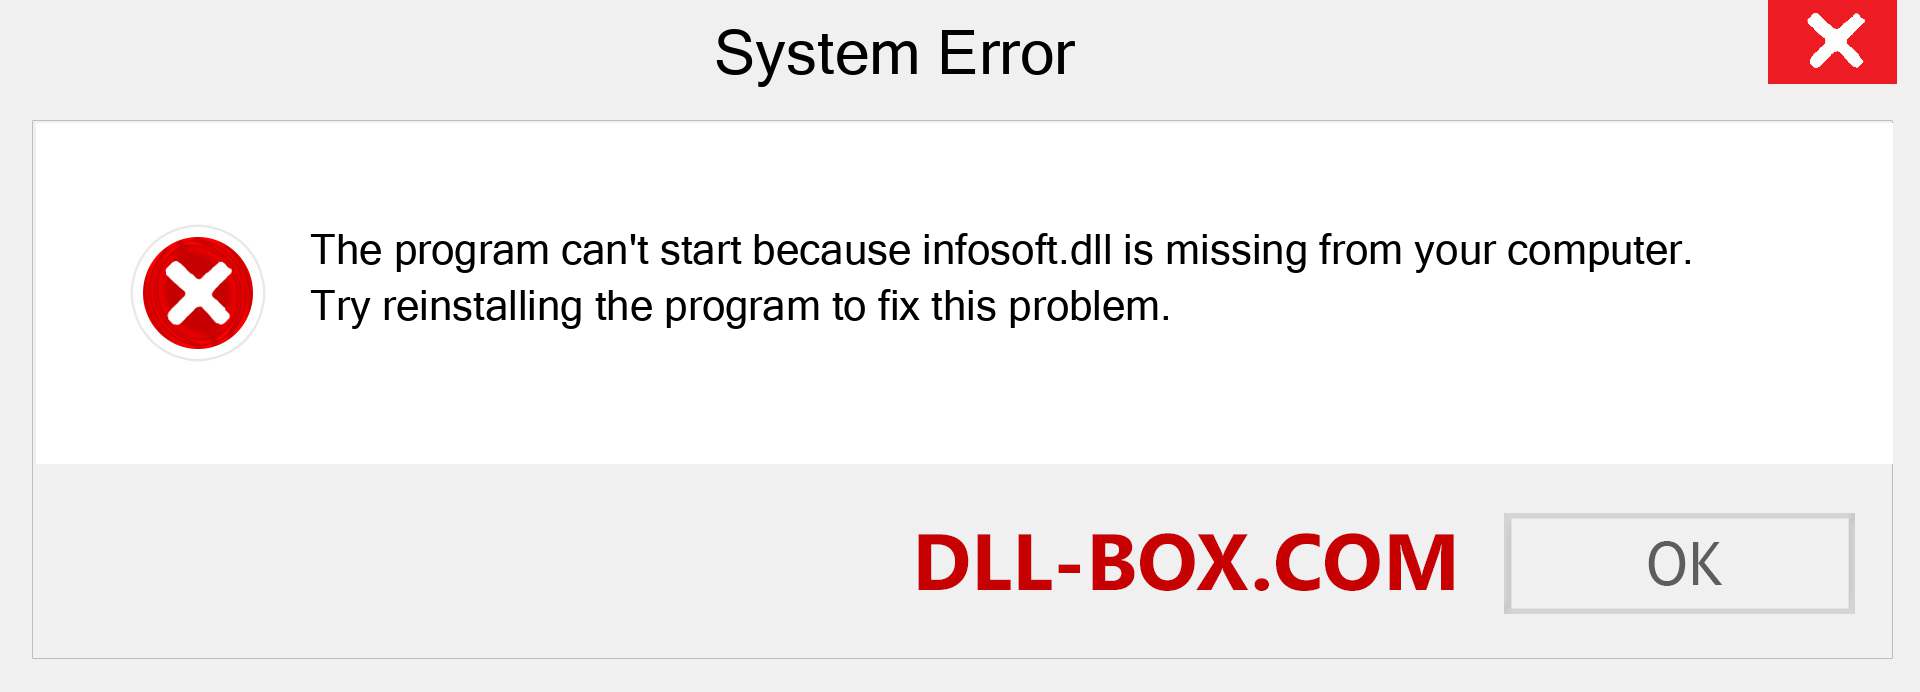  infosoft.dll file is missing?. Download for Windows 7, 8, 10 - Fix  infosoft dll Missing Error on Windows, photos, images